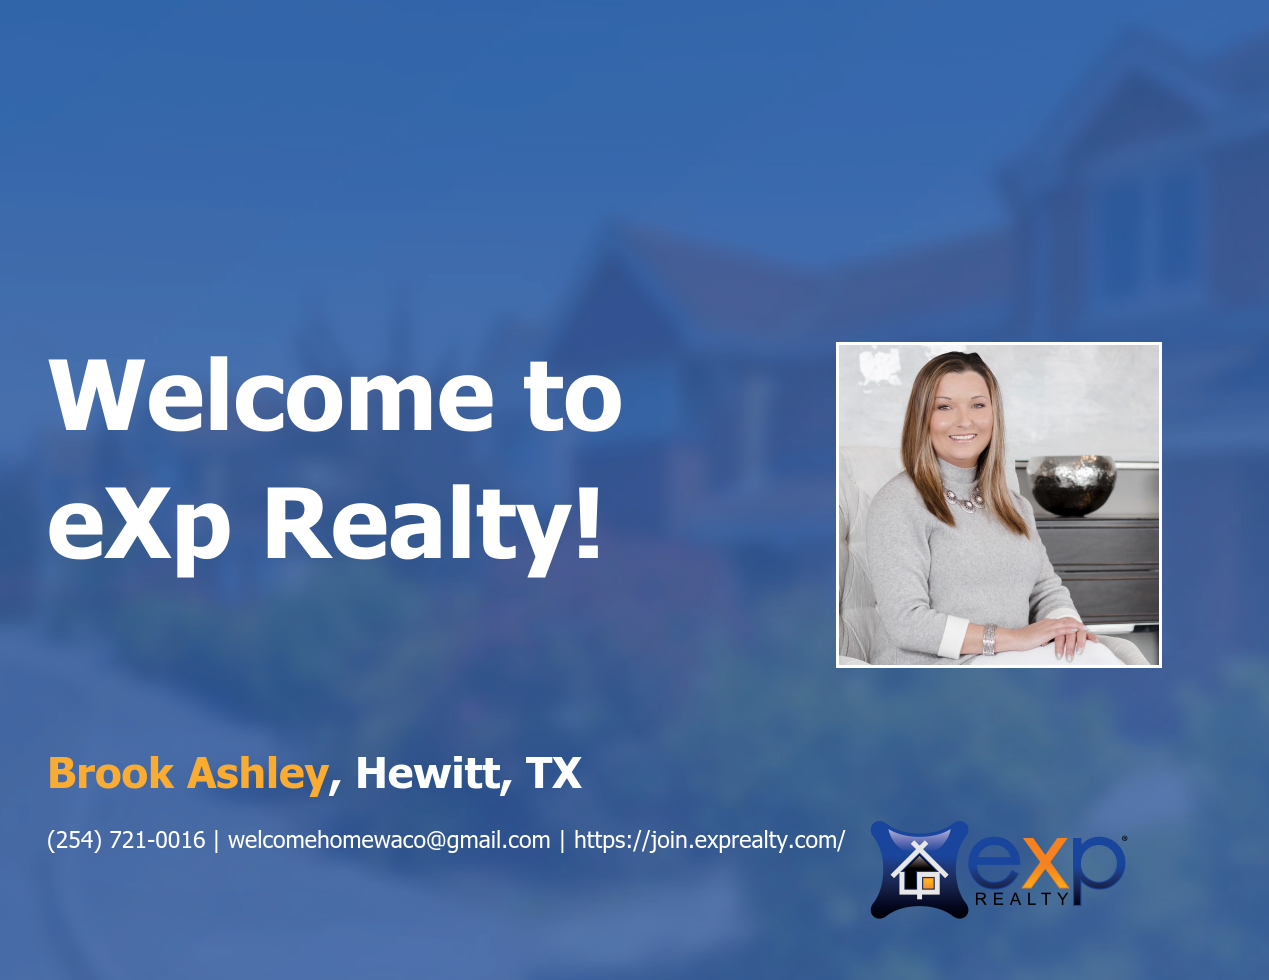 eXp Realty Welcomes Brook Ashley!